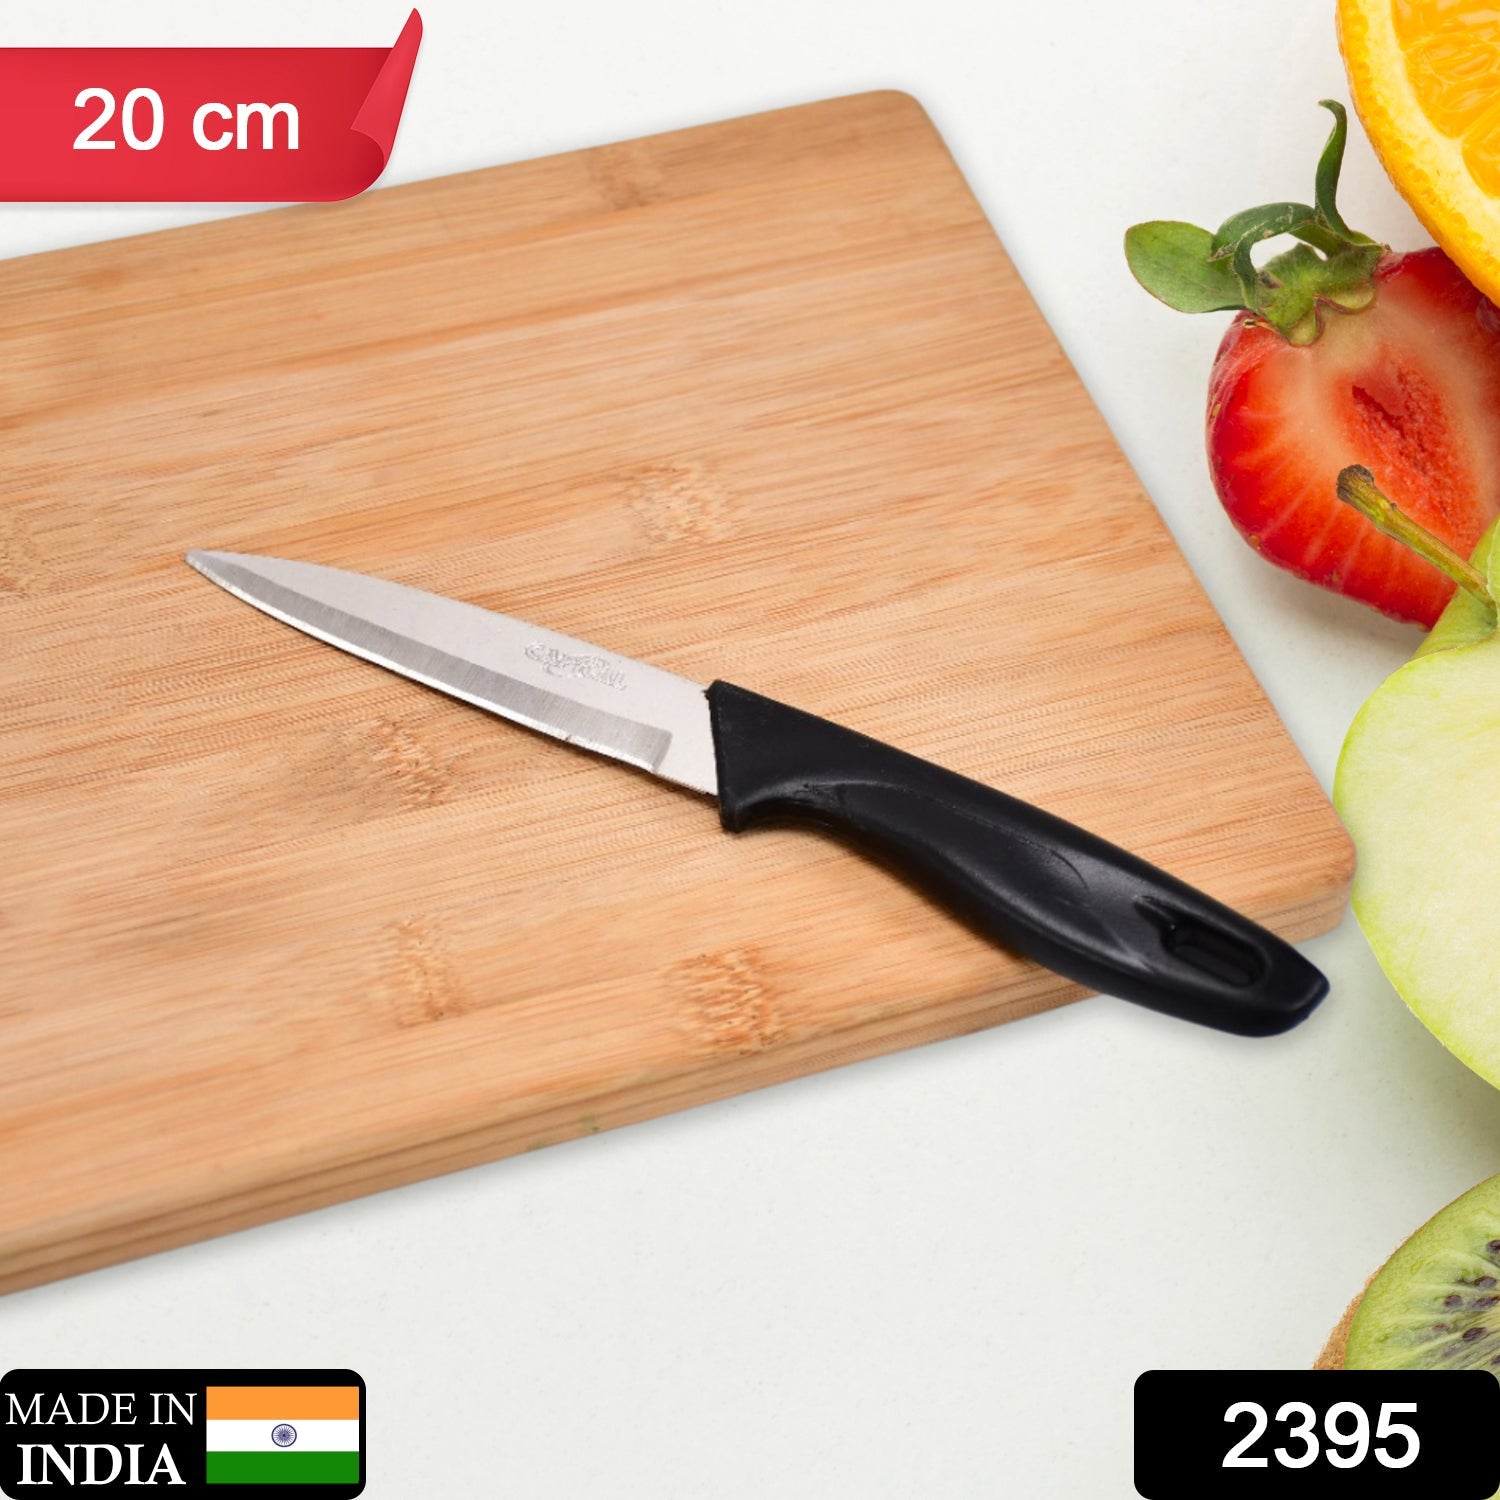 2395 Stainless Steel knife and Kitchen Knife with Black Grip Handle (20 Cm) 